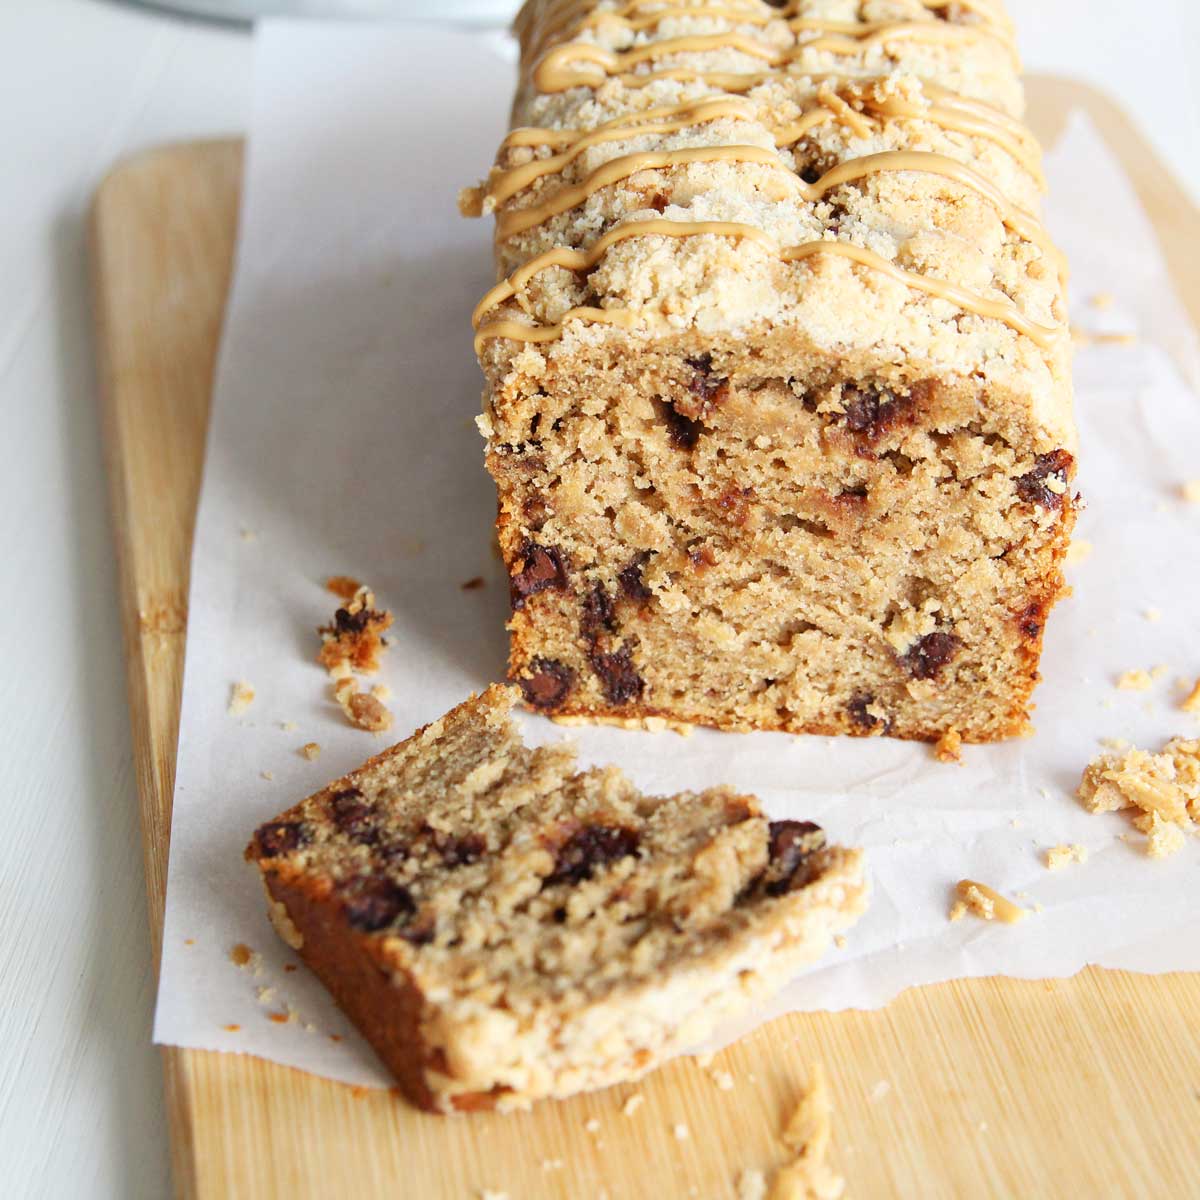 Coffee Lover's Chocolate Chip Banana Bread (No Eggs, Butter, or Dairy) - Flourless Banana Roll Cake